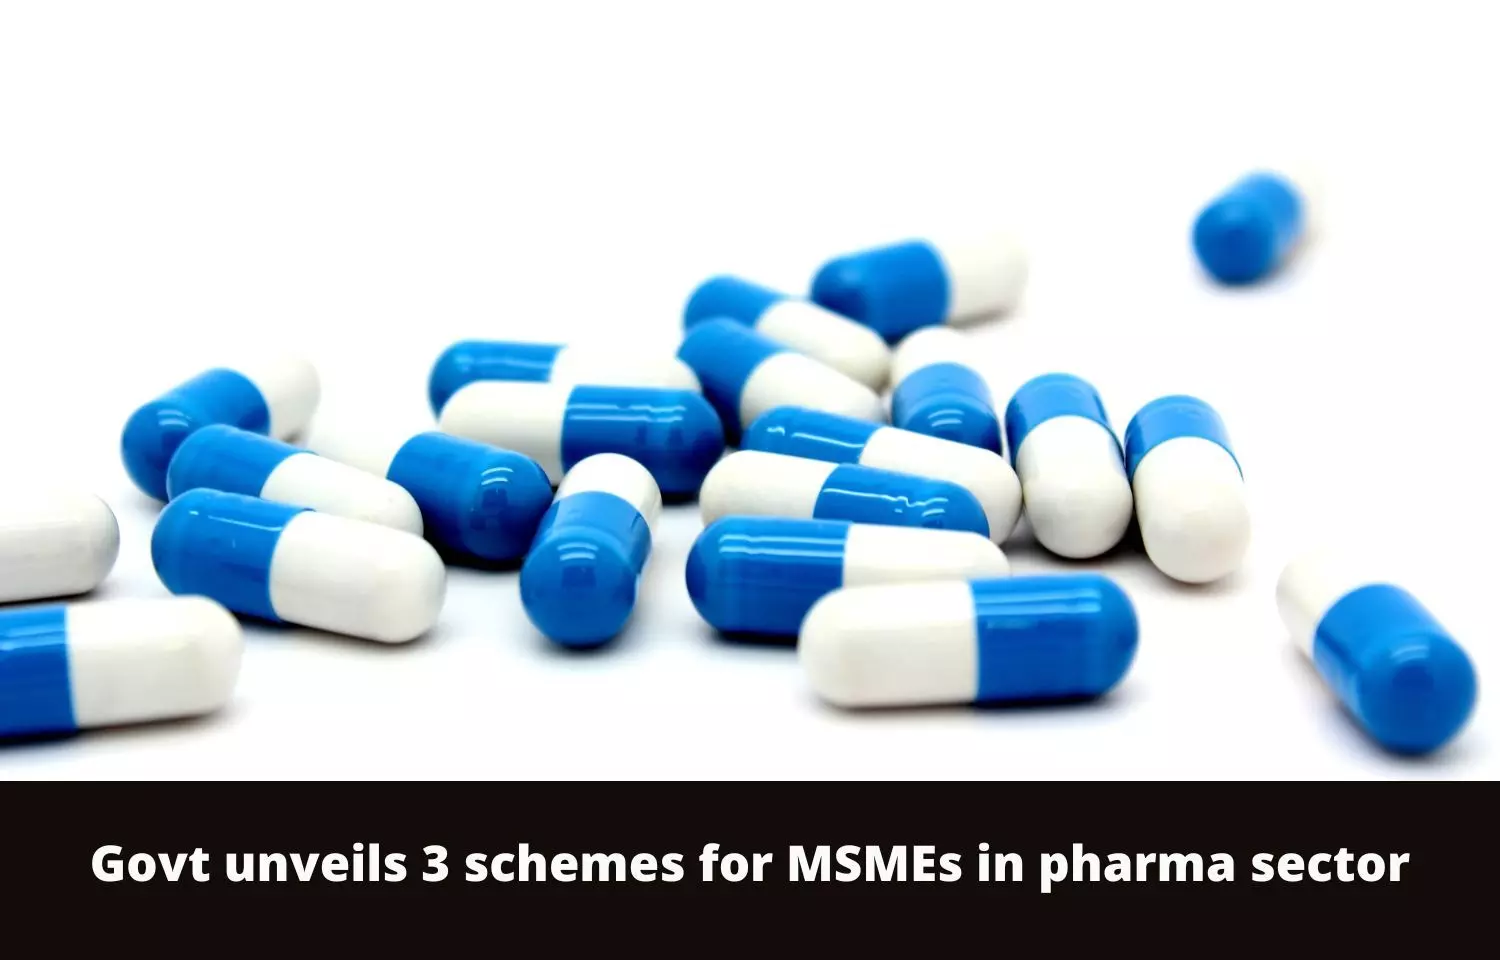 Govt launches 3 schemes for MSMEs in pharma sector